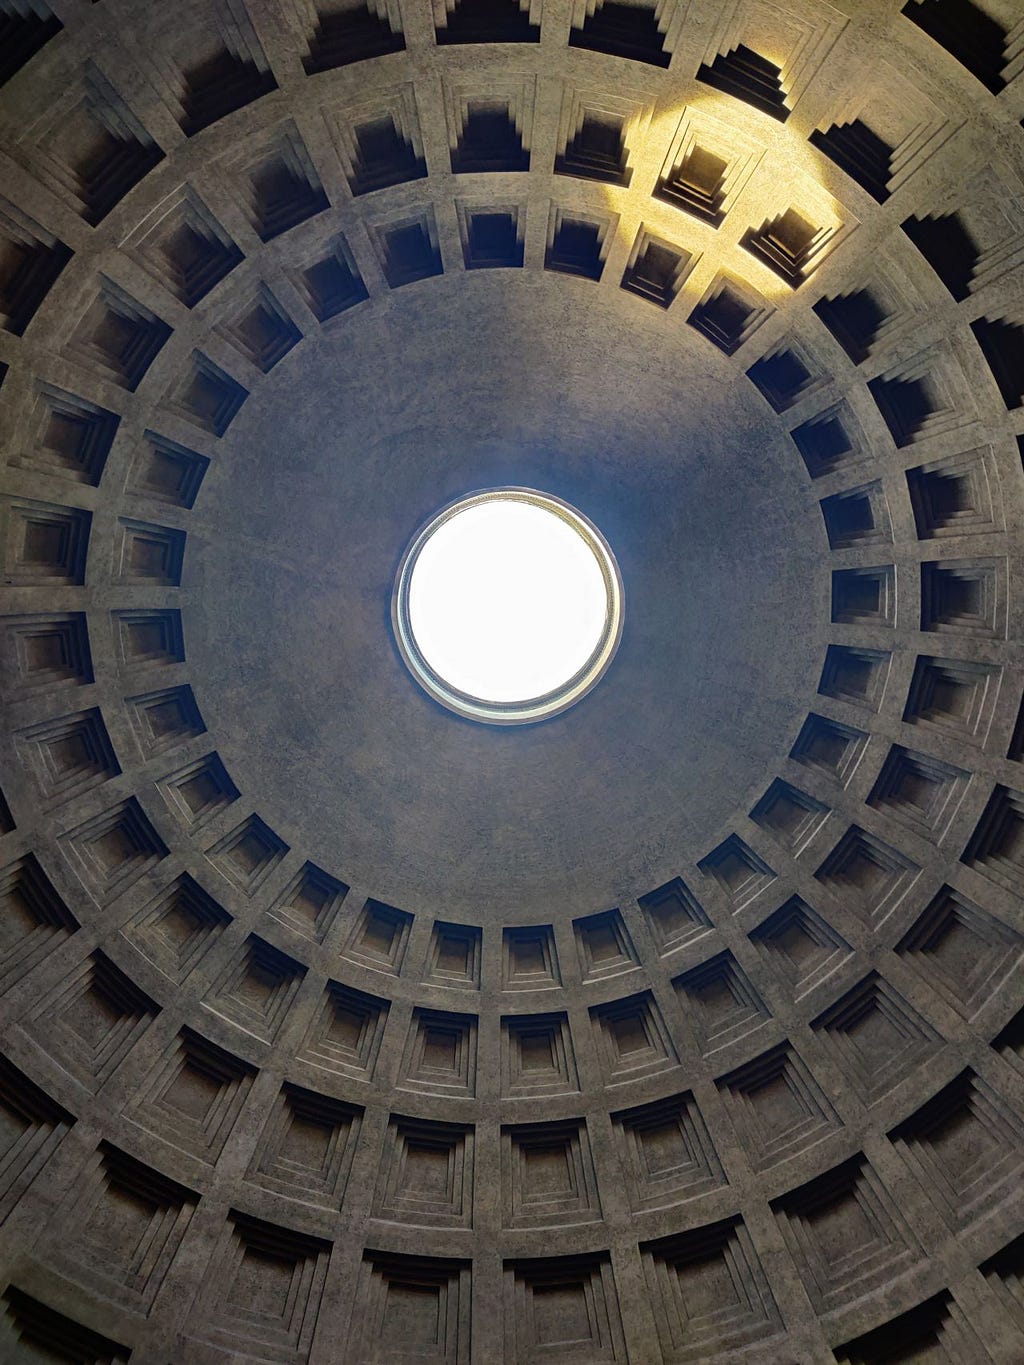 A photo of the dome at the Pantheon in Rome.